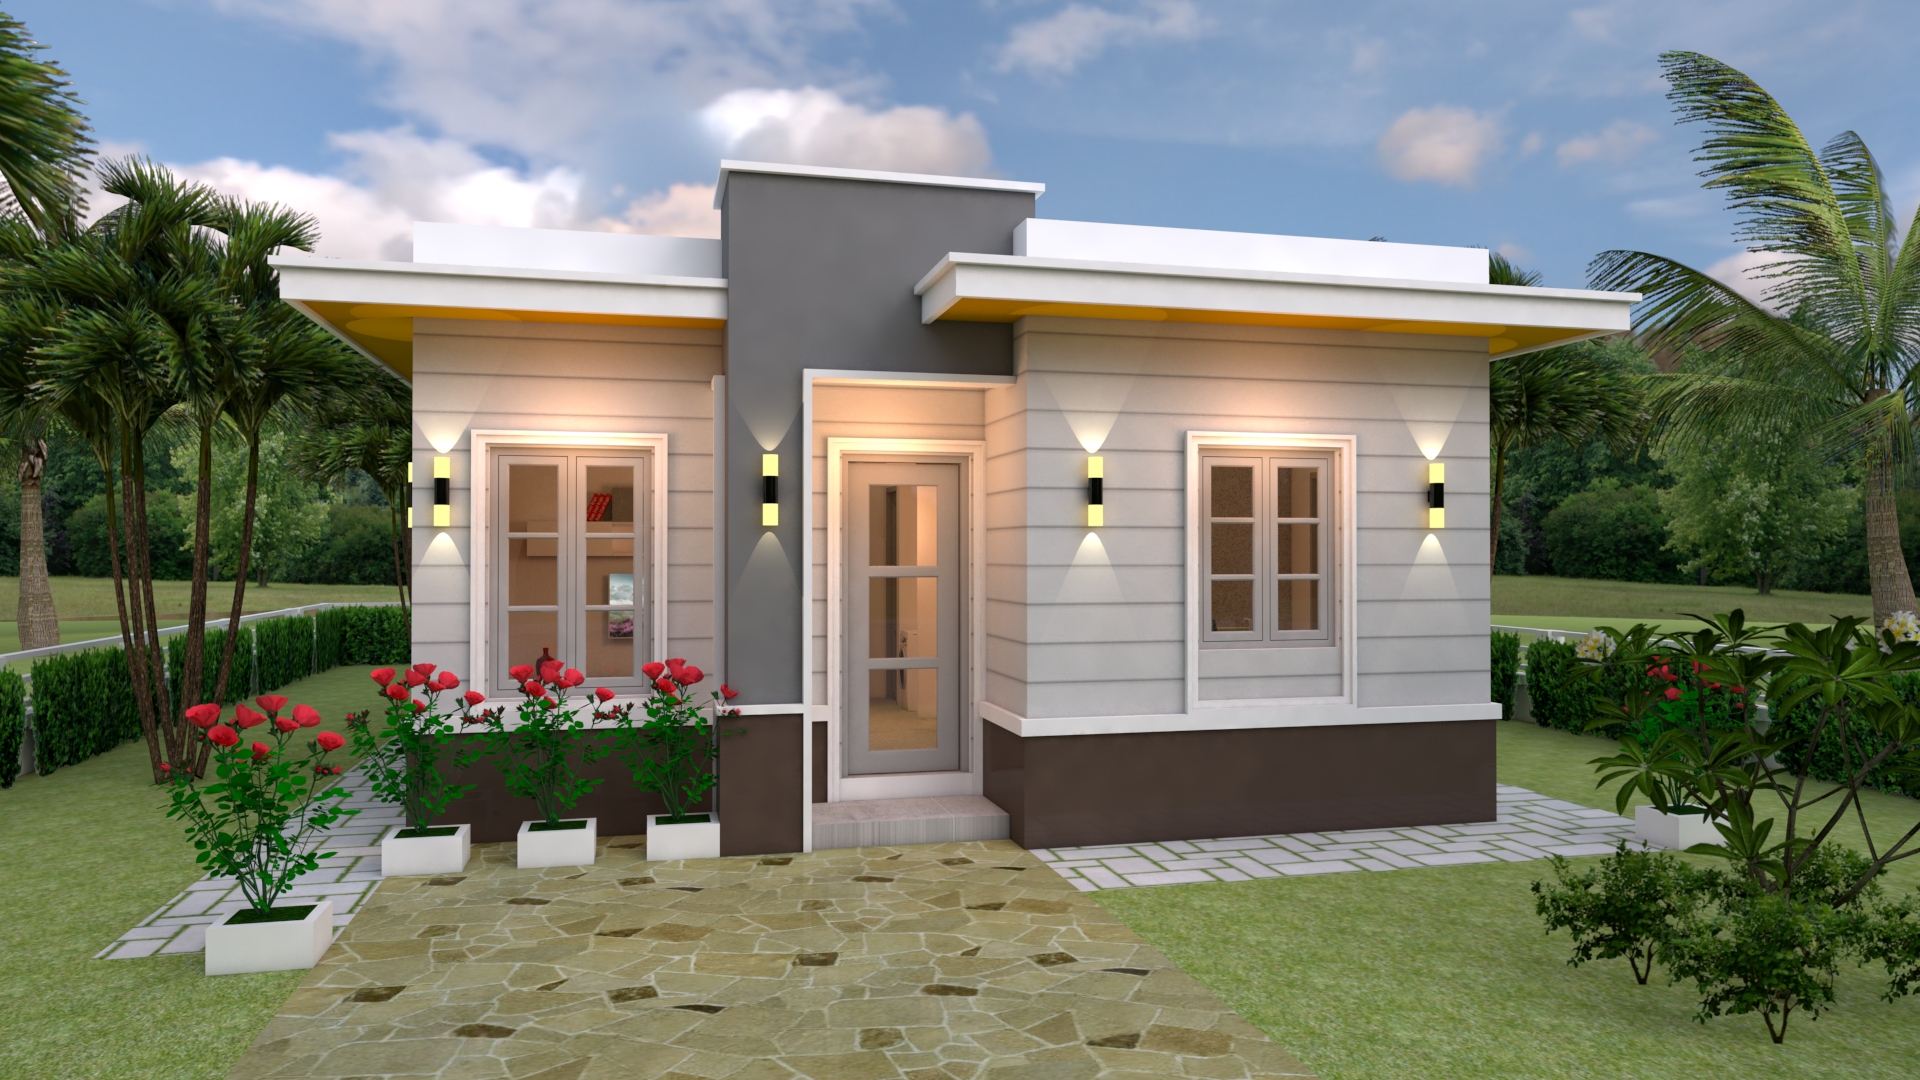 Nice Small Houses 7x10 Meter 23x33 Feet 3 Beds